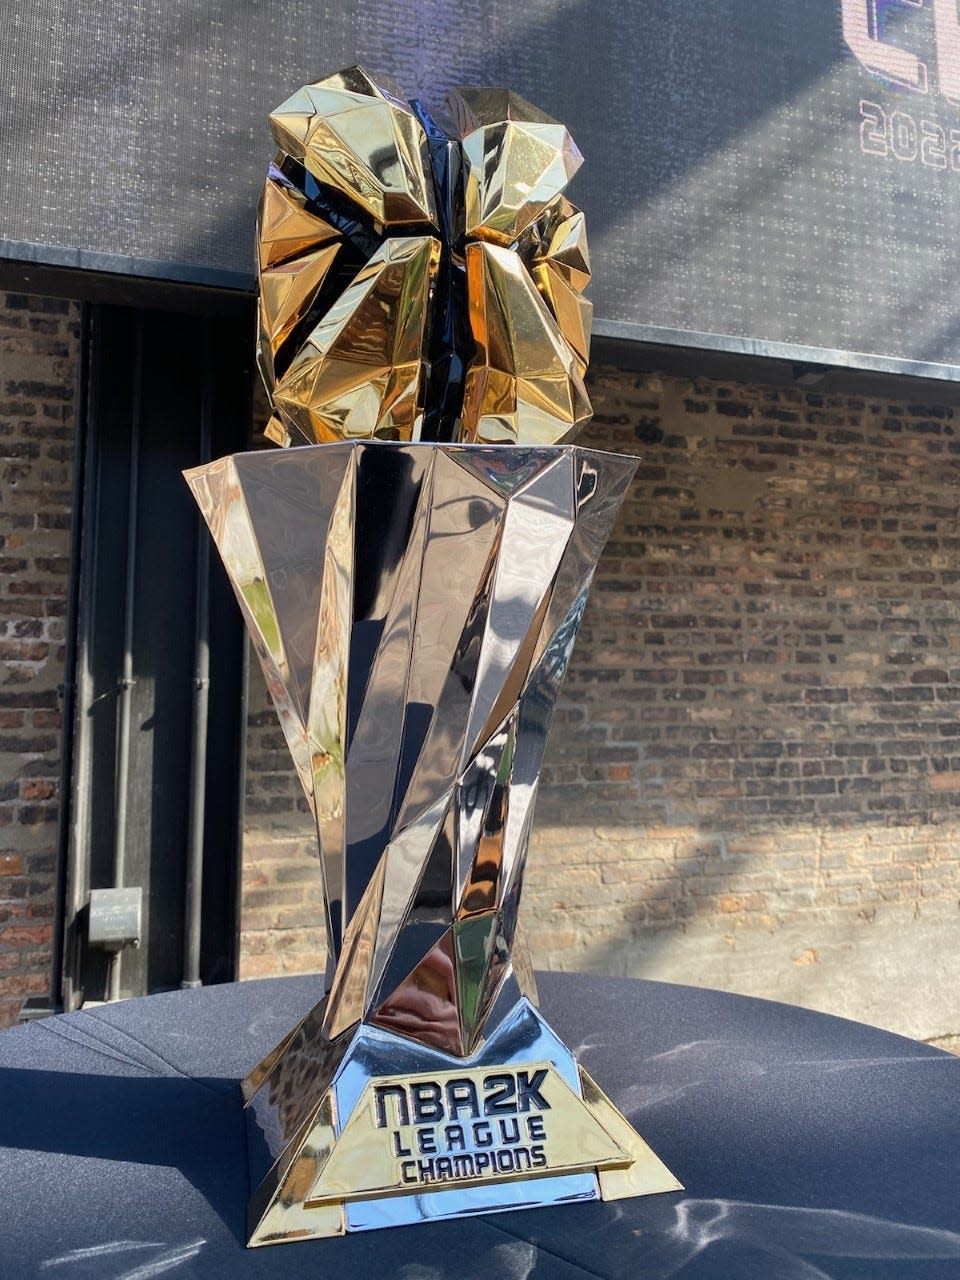 Bucks Gaming are the 2022 NBA 2K League champions. The esports team won this trophy and $500,000.